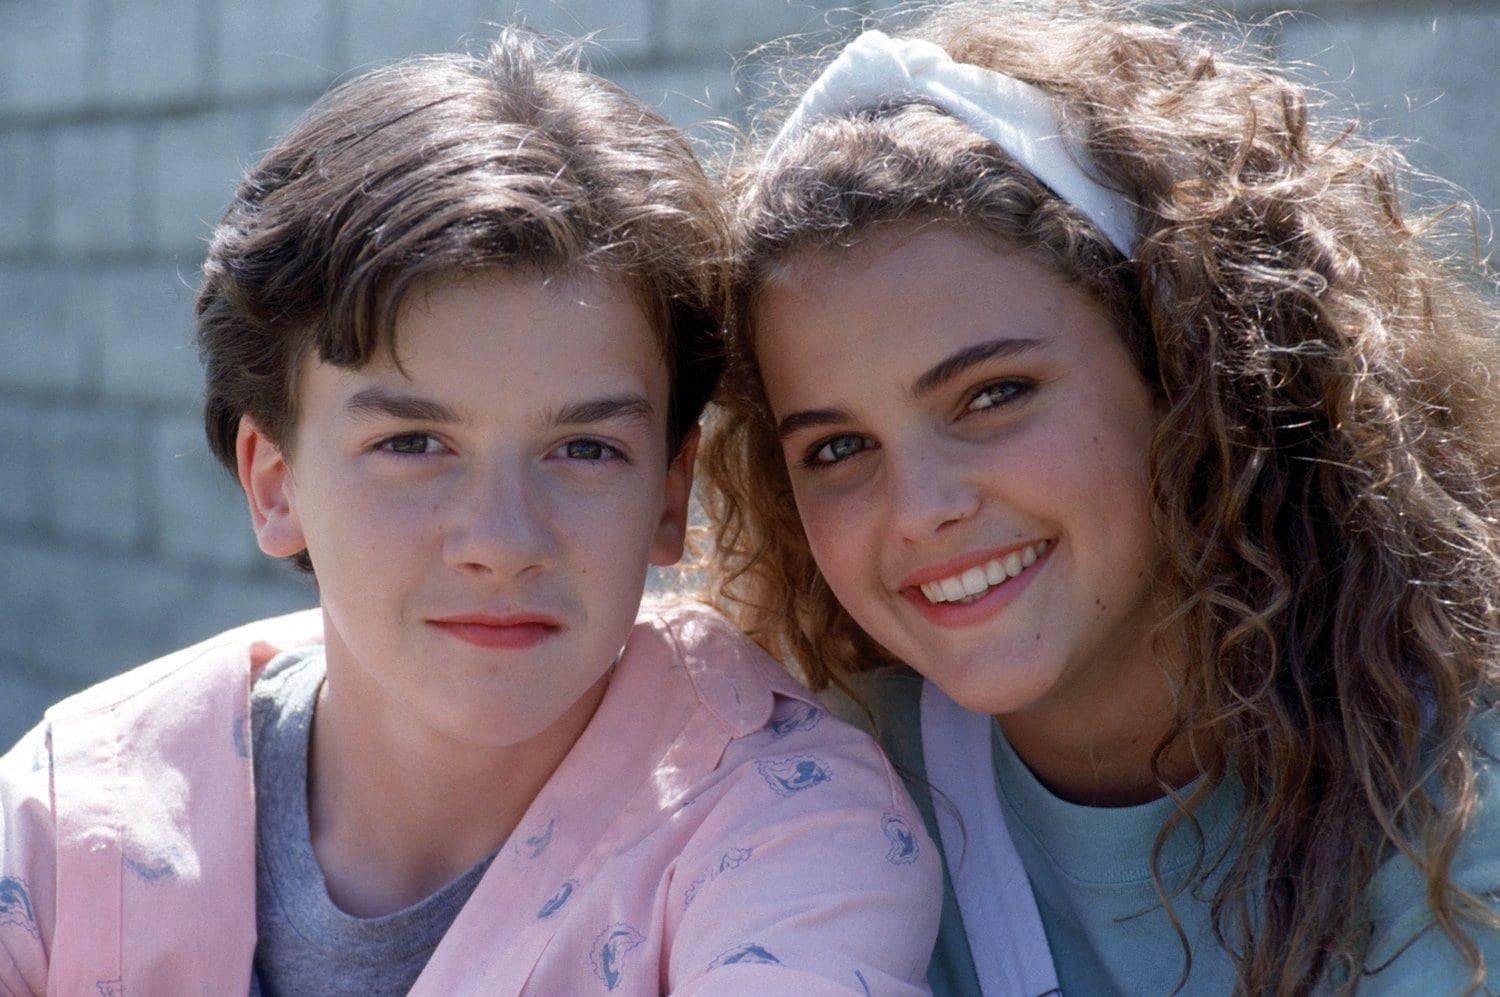 Keri Russell as Mandy Park and Robert Oliveri as Nick Szalinski in the 1992 American science fiction comedy family film Honey, I Blew Up the Kid